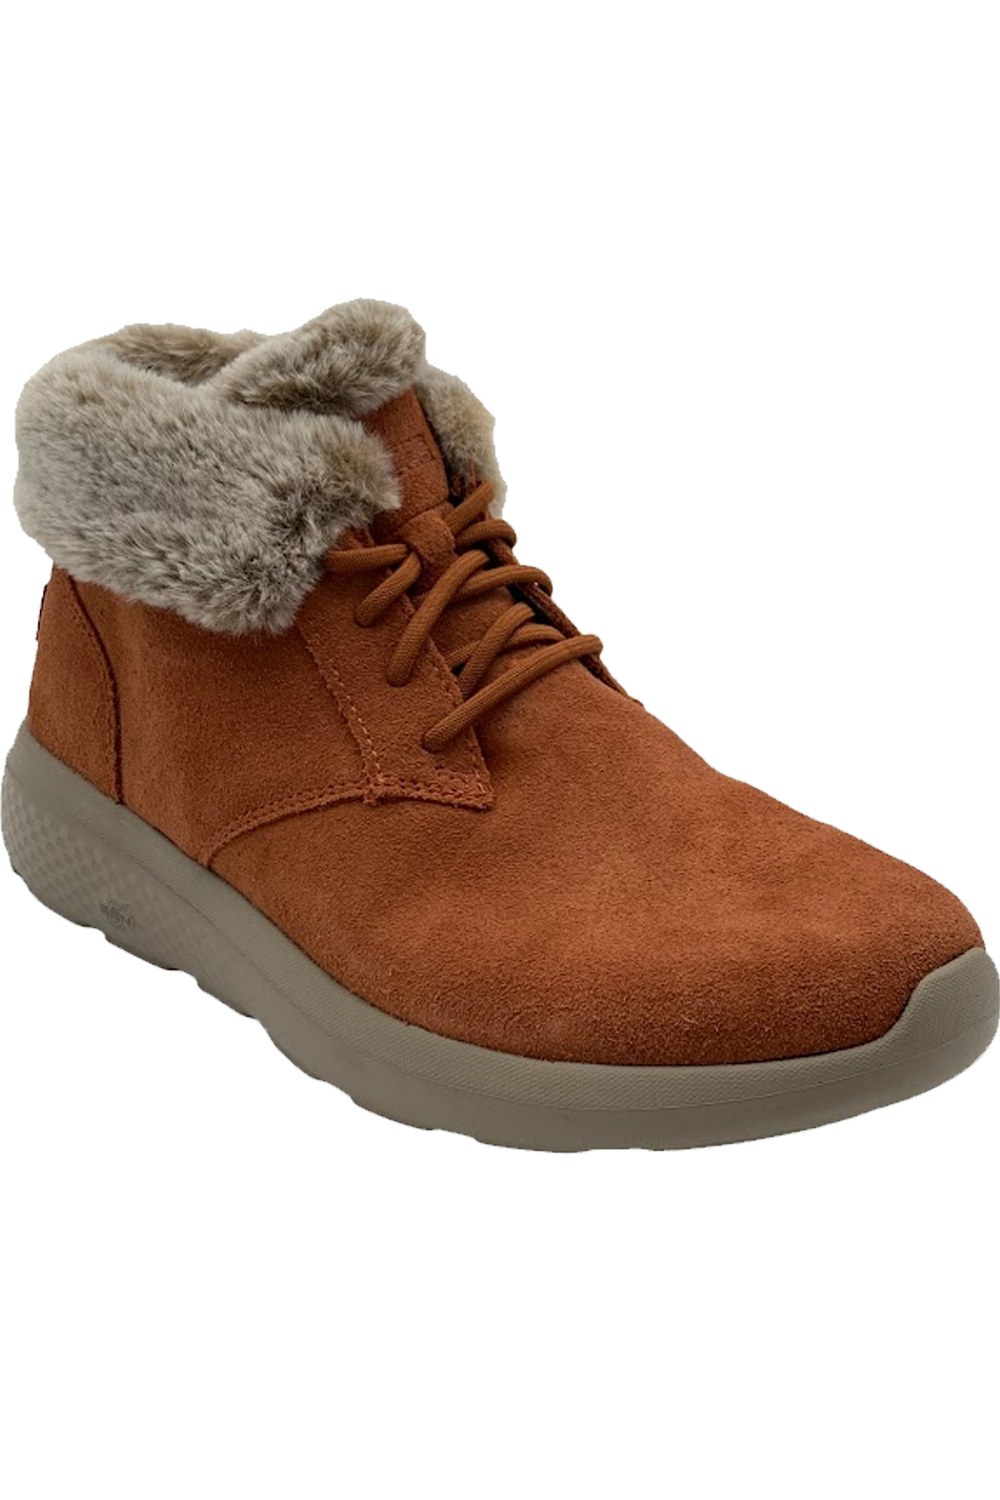 Skechers On the GO City 2 Suede Ankle Boots Winter Rust | Jender